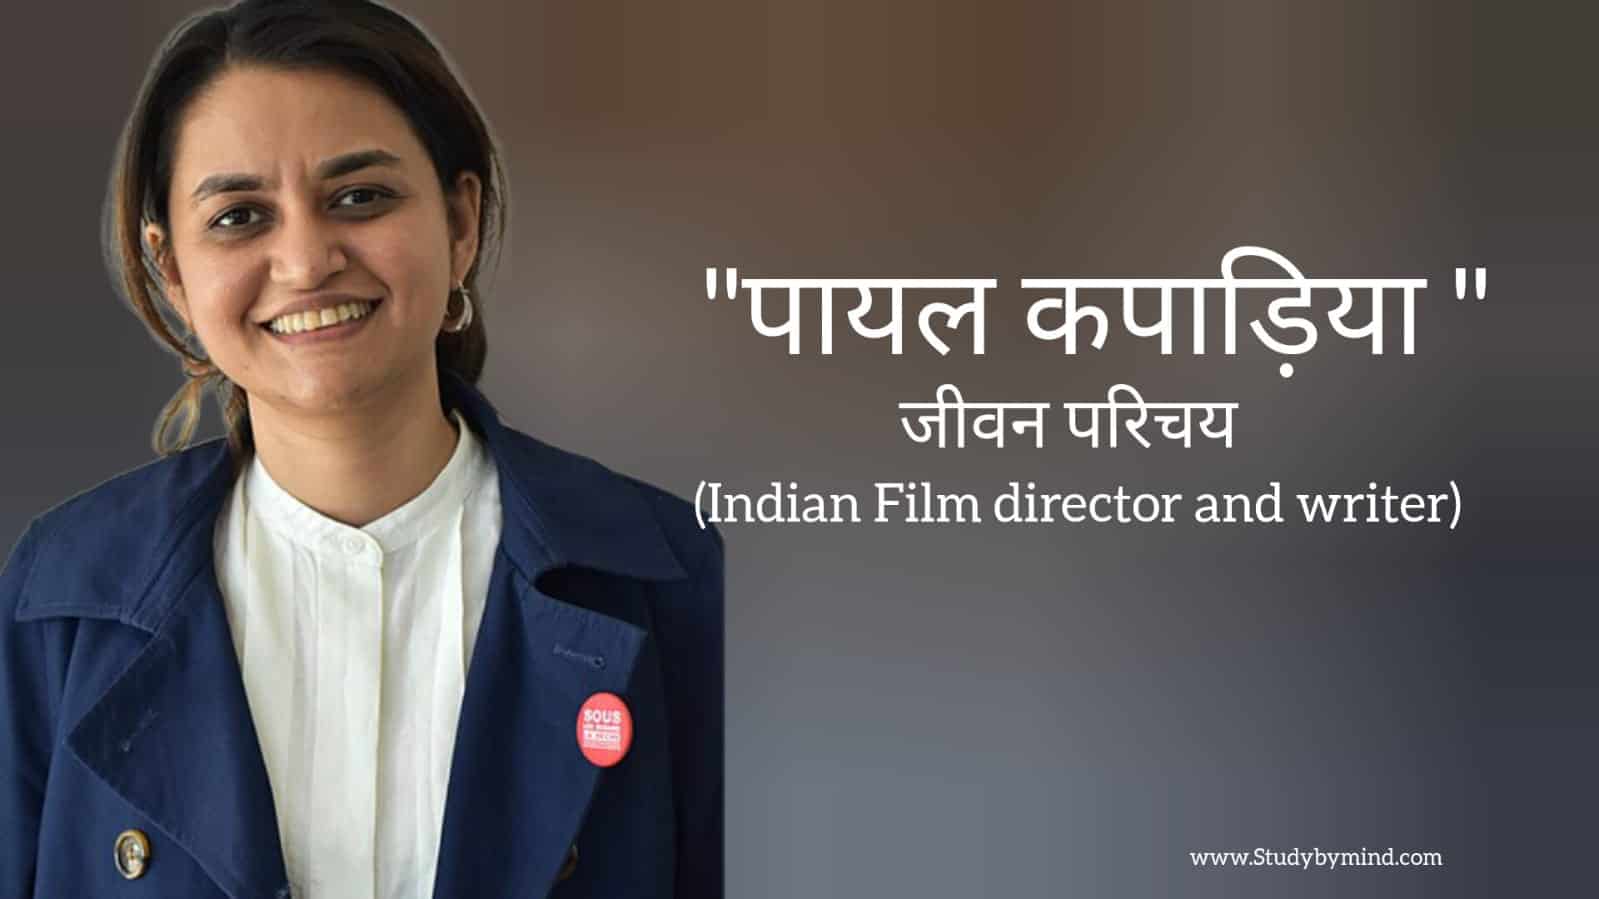 You are currently viewing पायल कपाड़िया जीवन परिचय Payal kapadia biography in hindi ( Writer and film director)